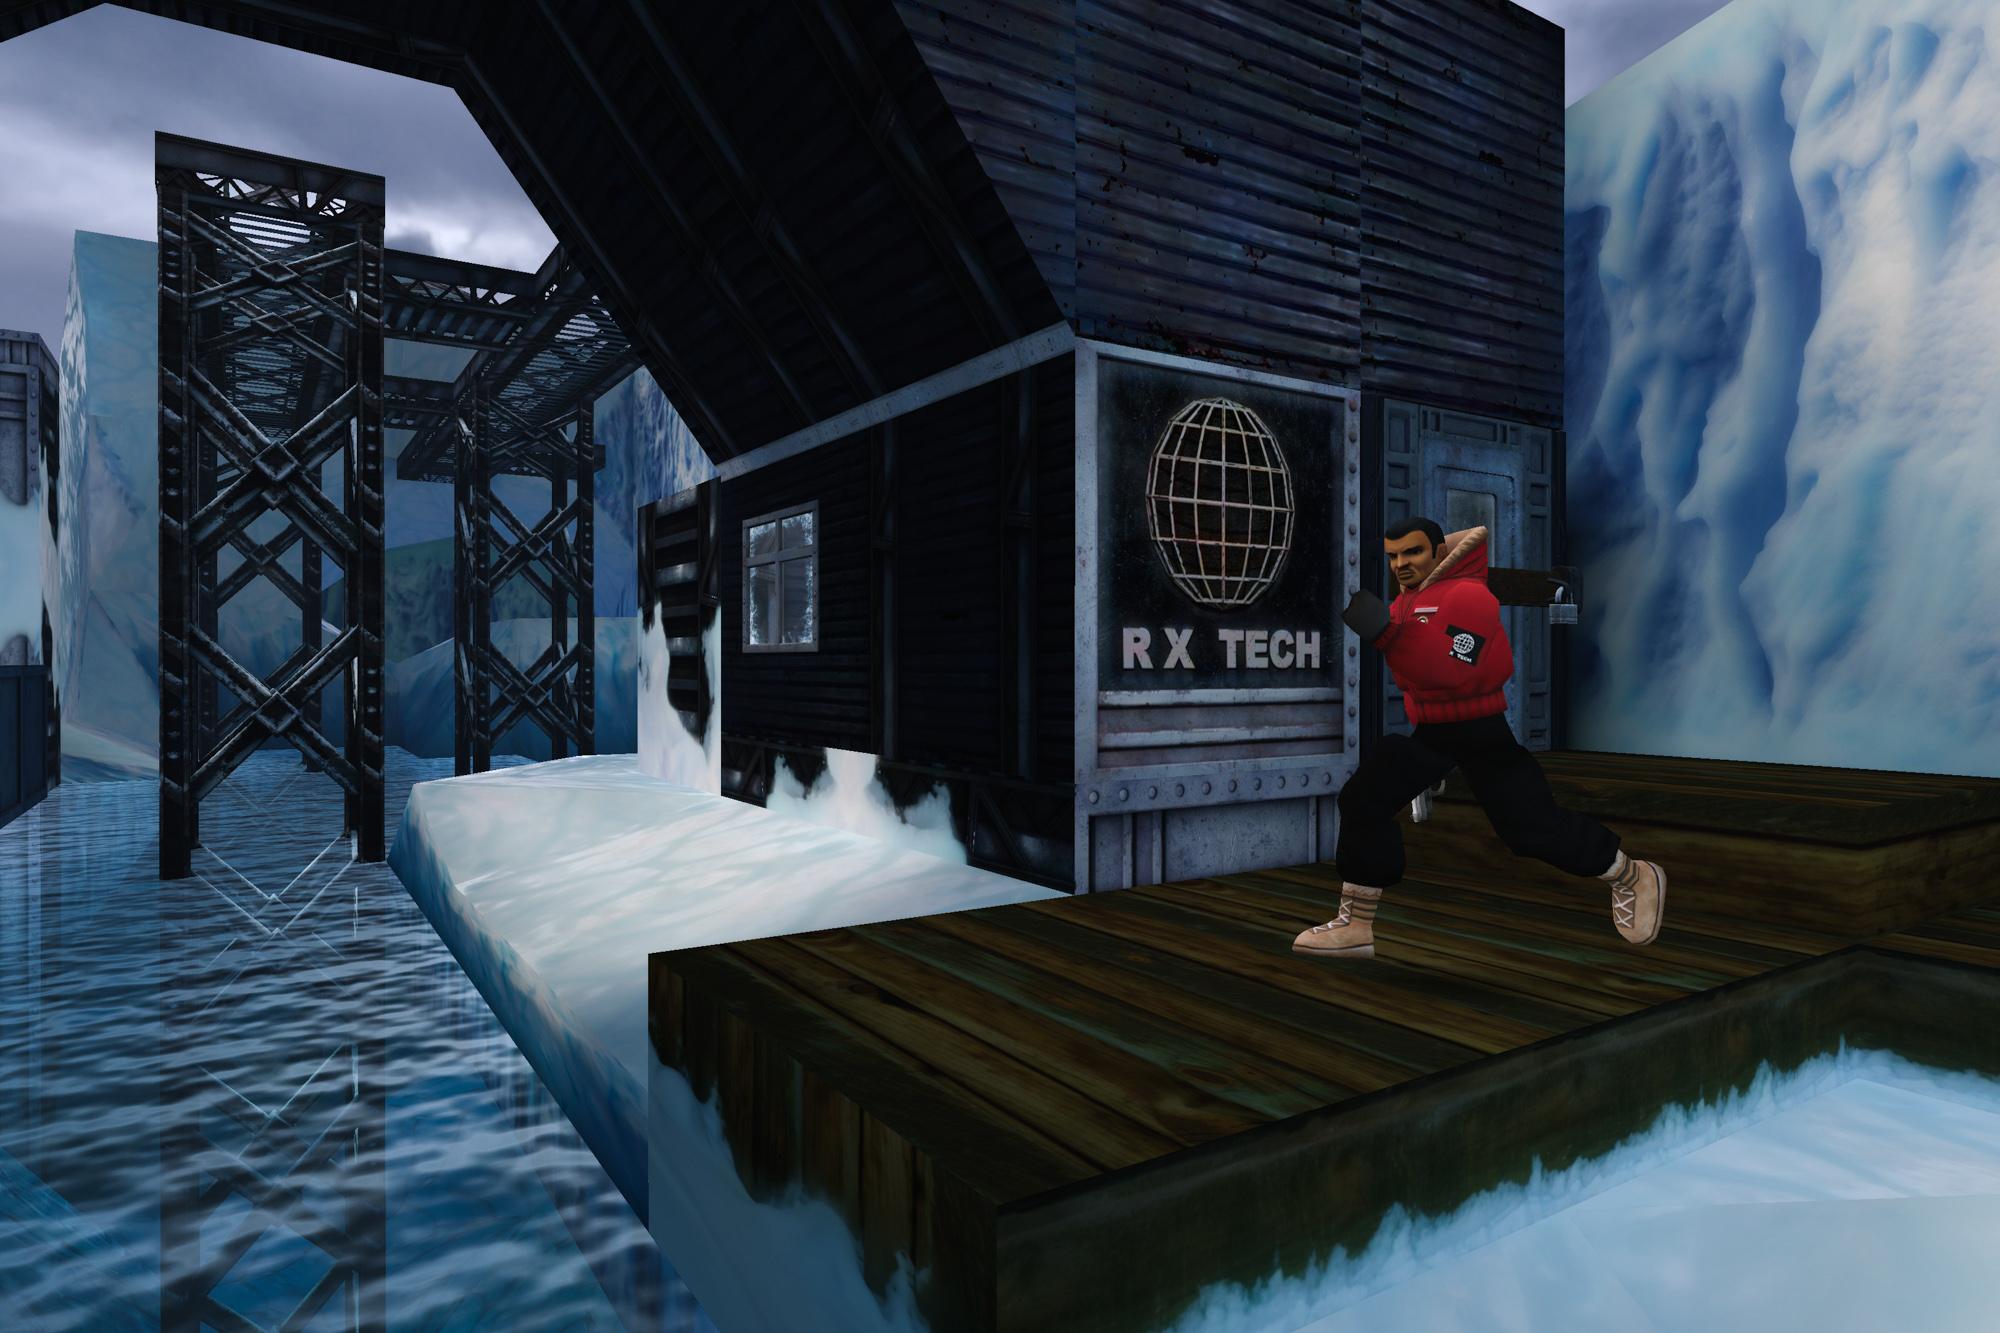 RX Tech Antarctica research base with one of the workers patrolling the area.